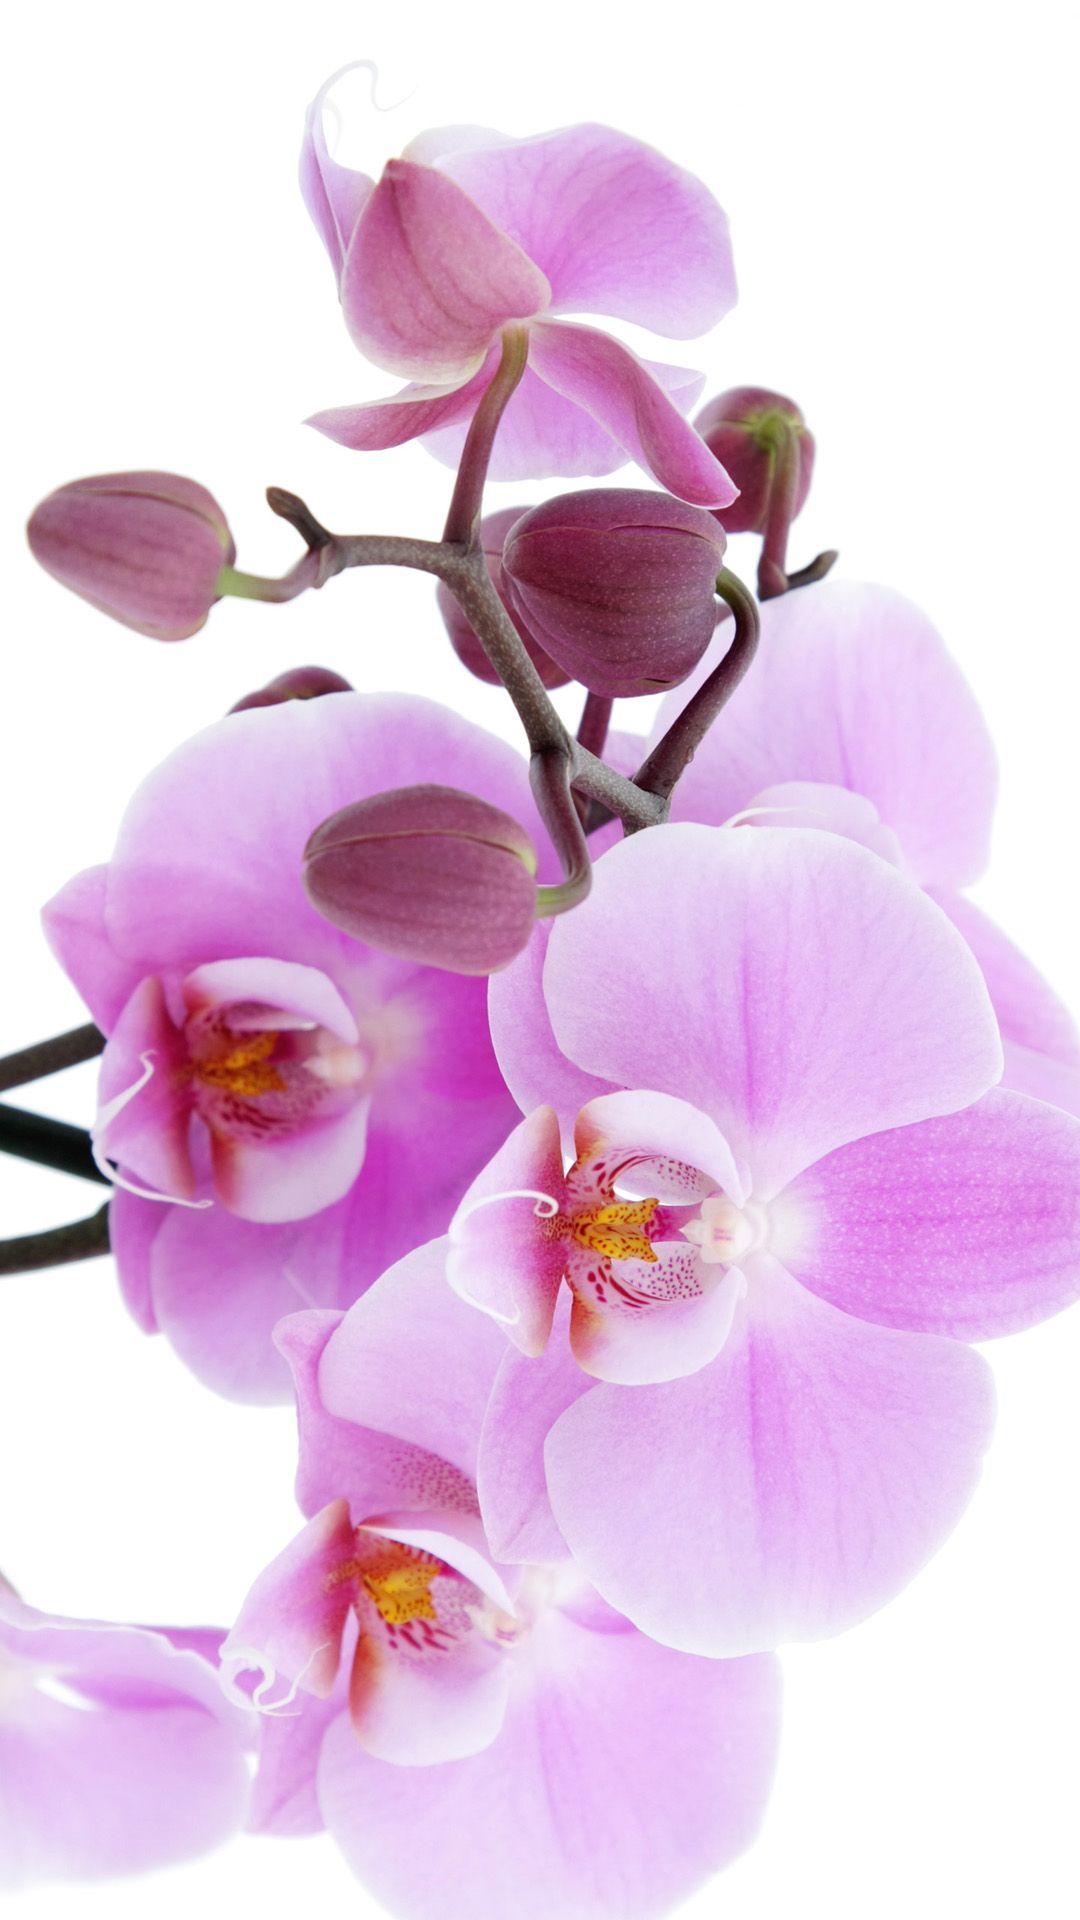 Pure Pink Orchid iPhone 6 wallpaper. Orchid wallpaper, Flower